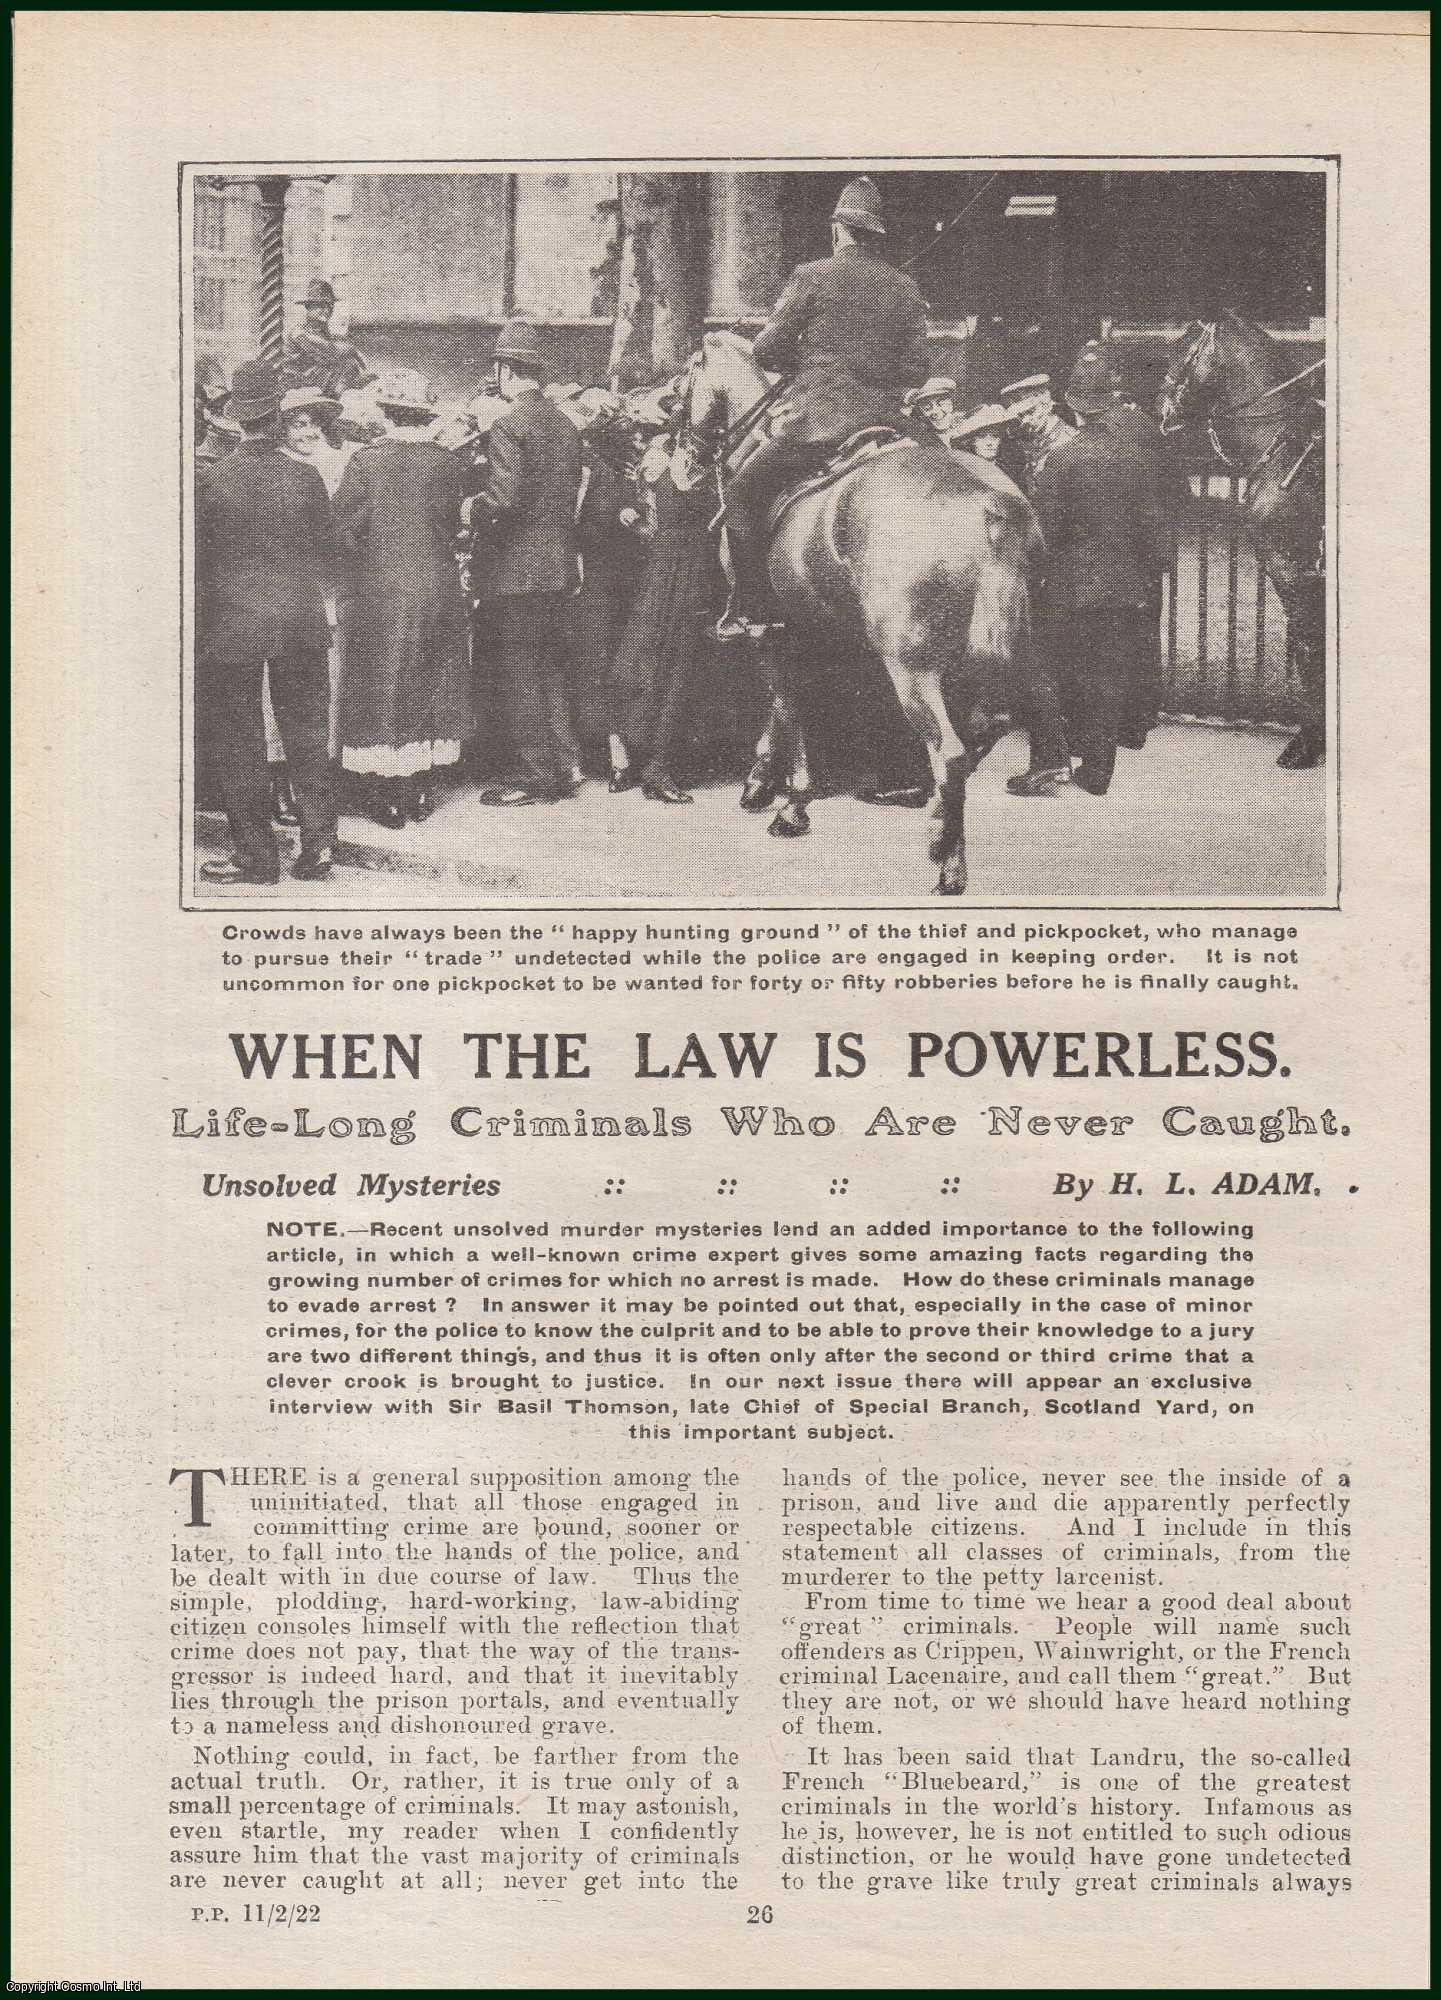 H.L. Adam - Life-Long Criminals Who Are Never Caught : When the Law is Powerless, Unsolved Mysteries. This is an original article from the Penny Pictorial Magazine, 1922.